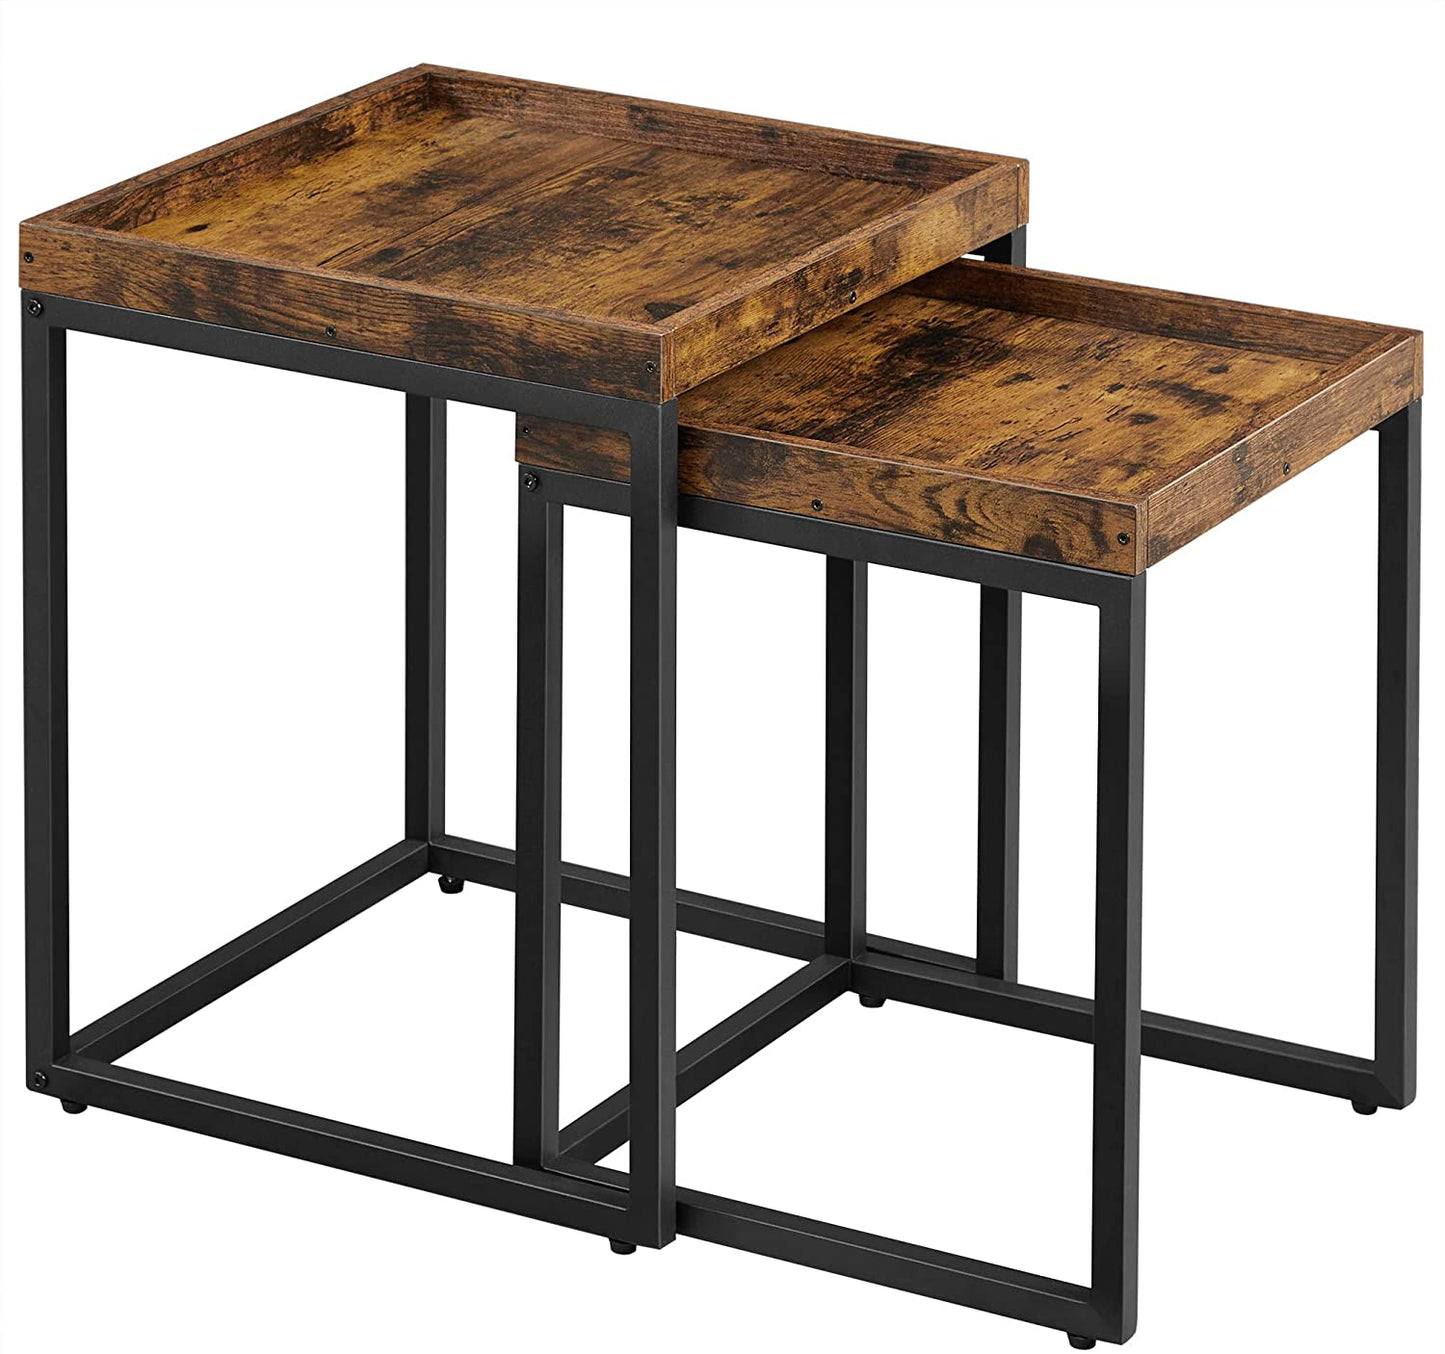 Nest Of Set of 2 Side Tables, End Tables with Raised Edges, Coffee Tables for Living Room, Industrial Rustic Brown and Black